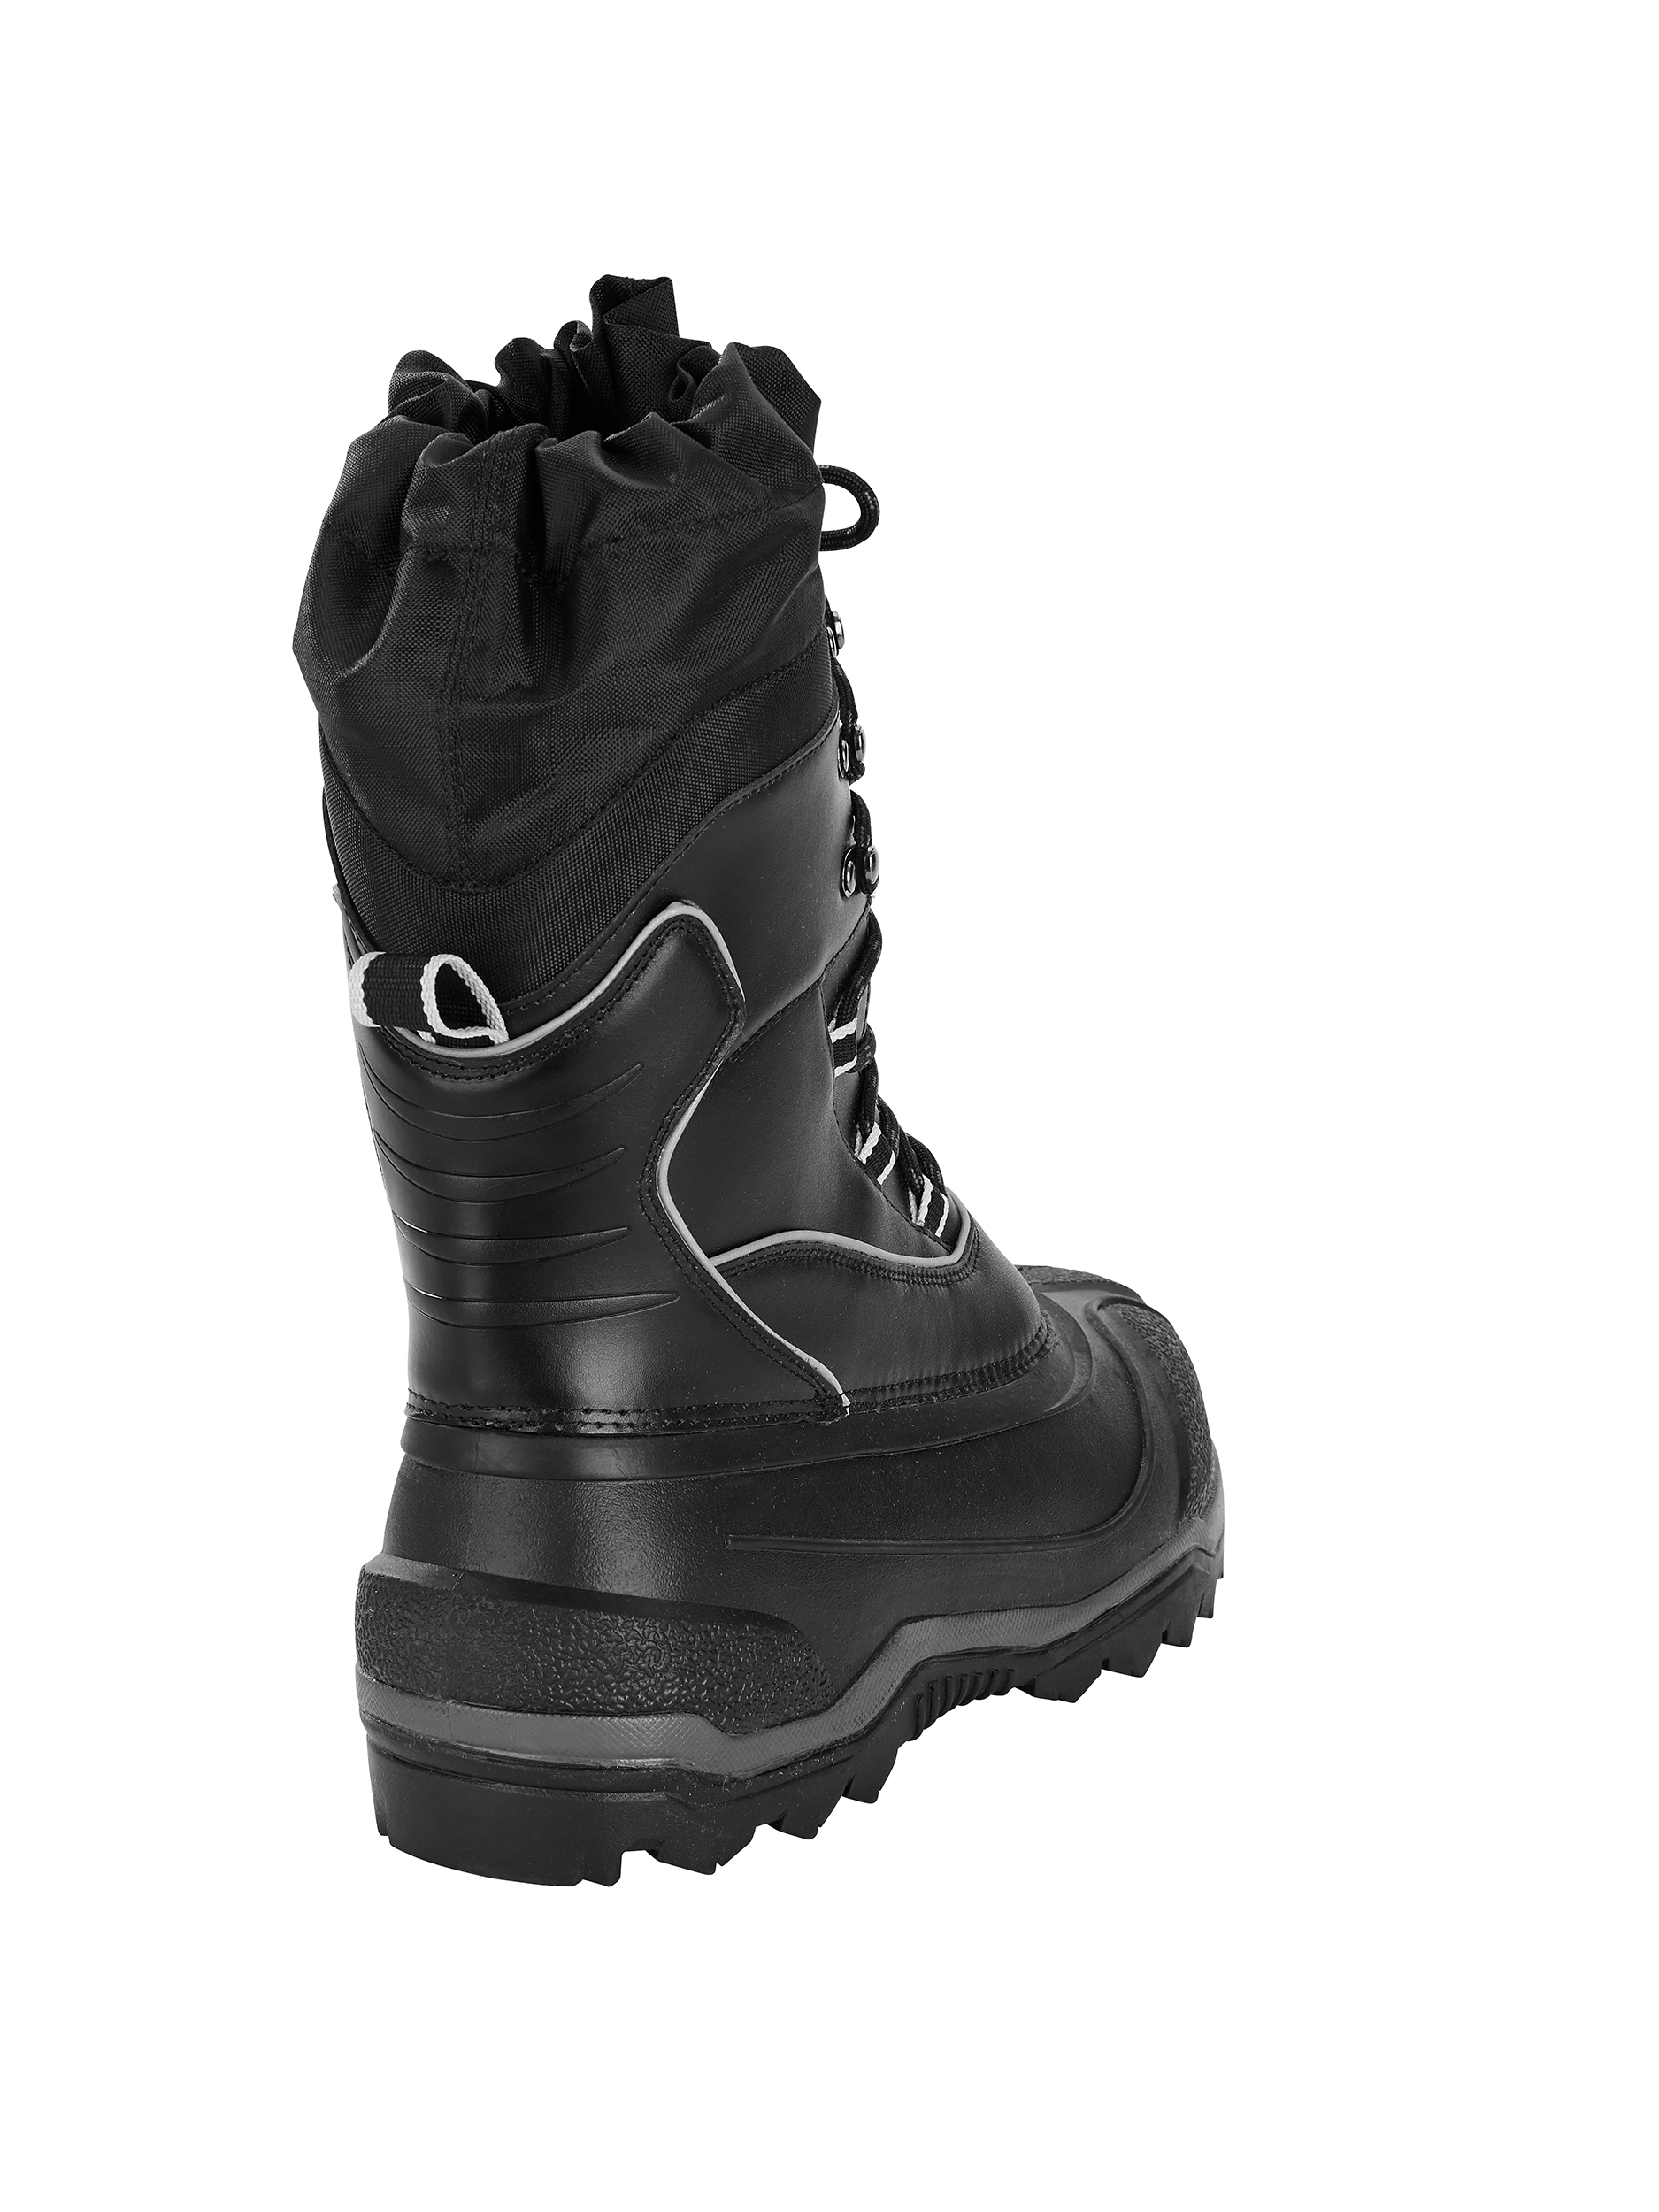 George Men's Insulated Extreme Winter Boot - image 5 of 5